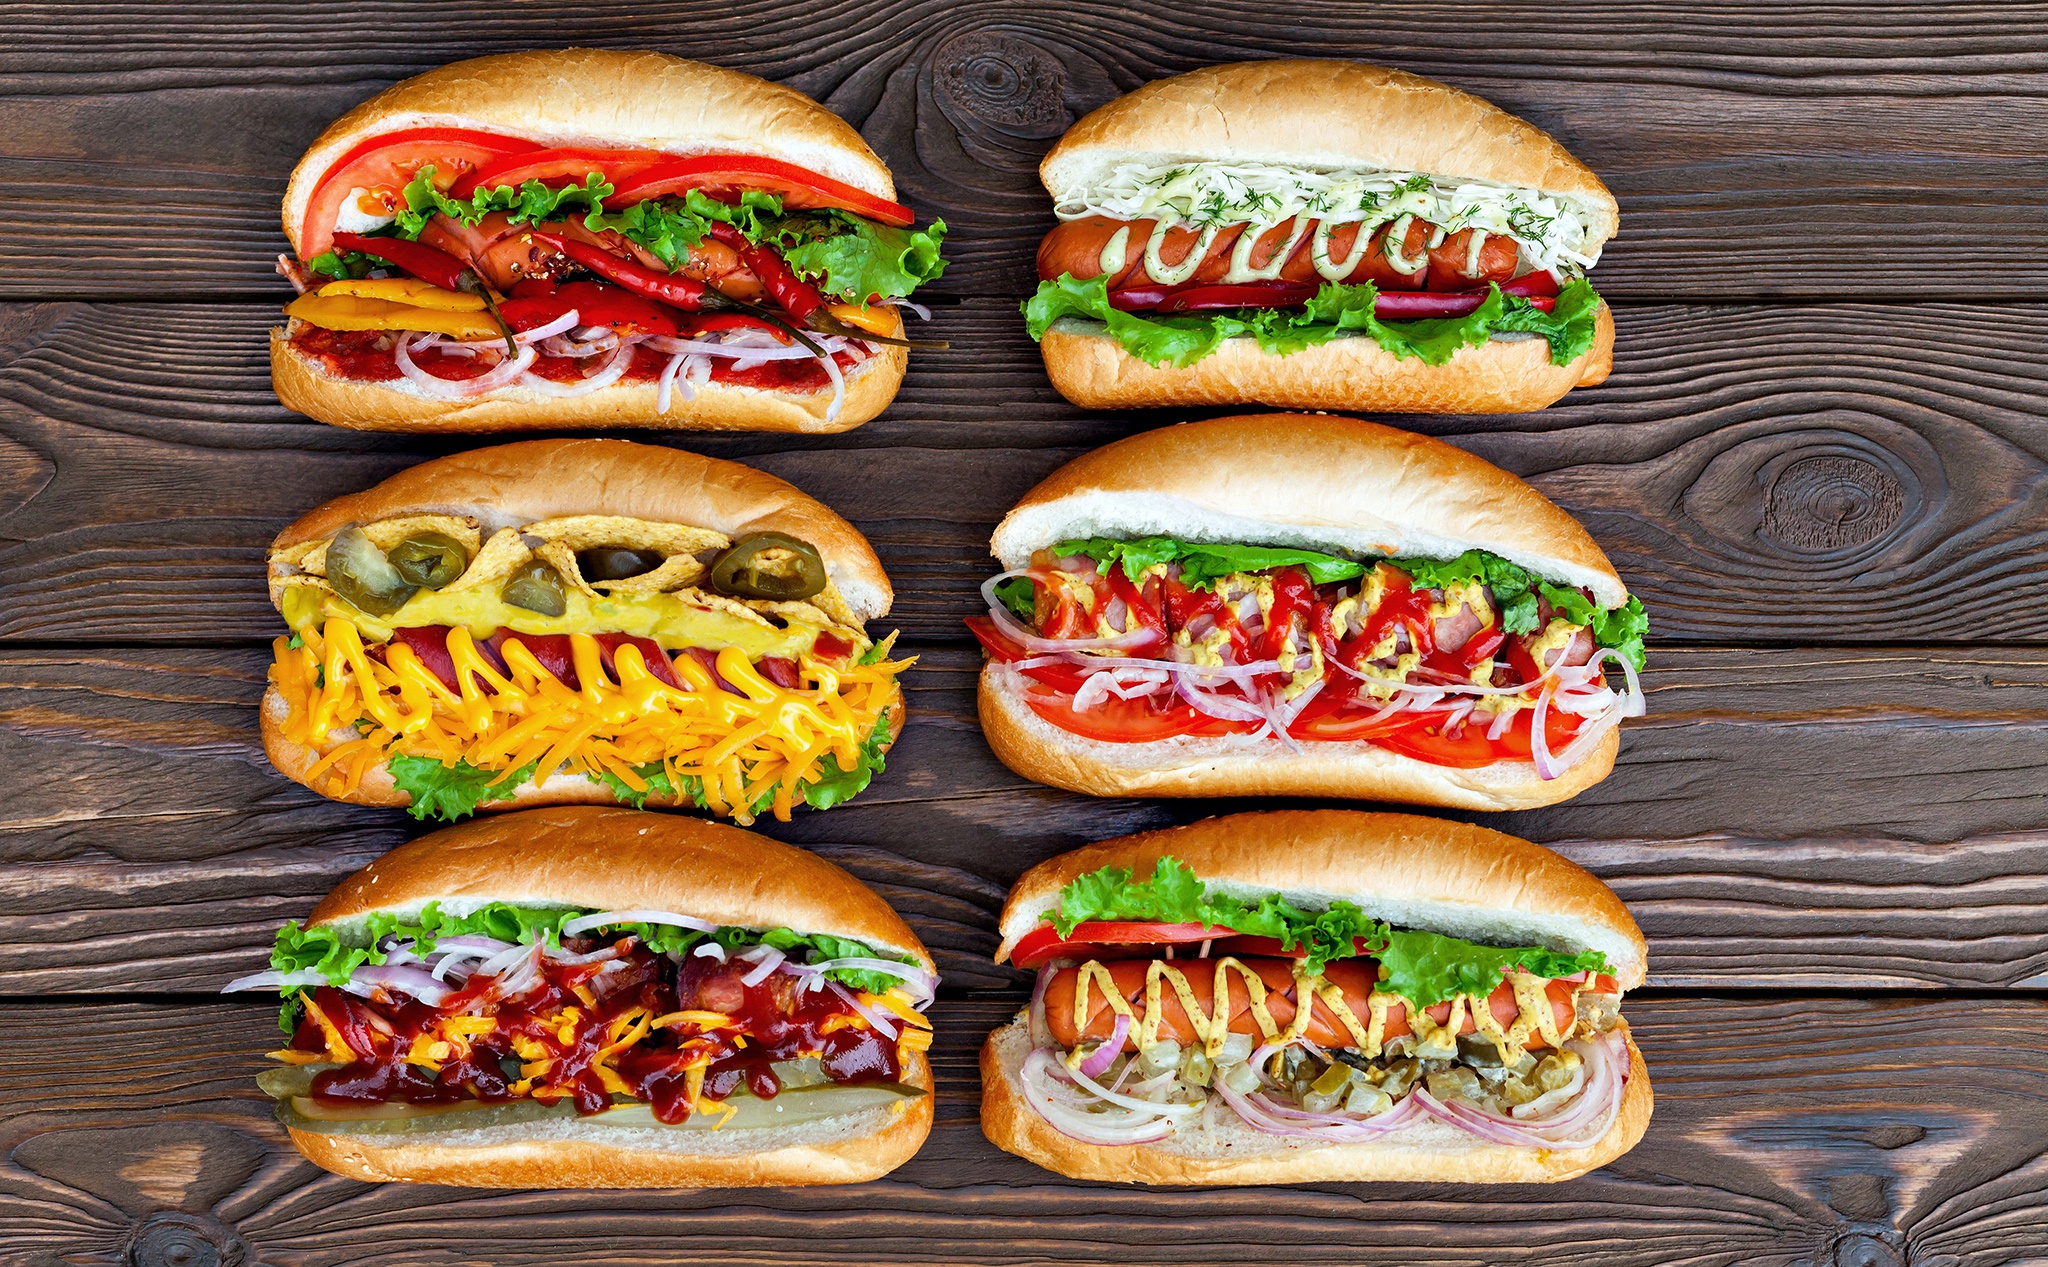 General 2048x1267 food sandwiches hot dogs jalapenos cheese onion tomatoes lettuce chips pepper mustard